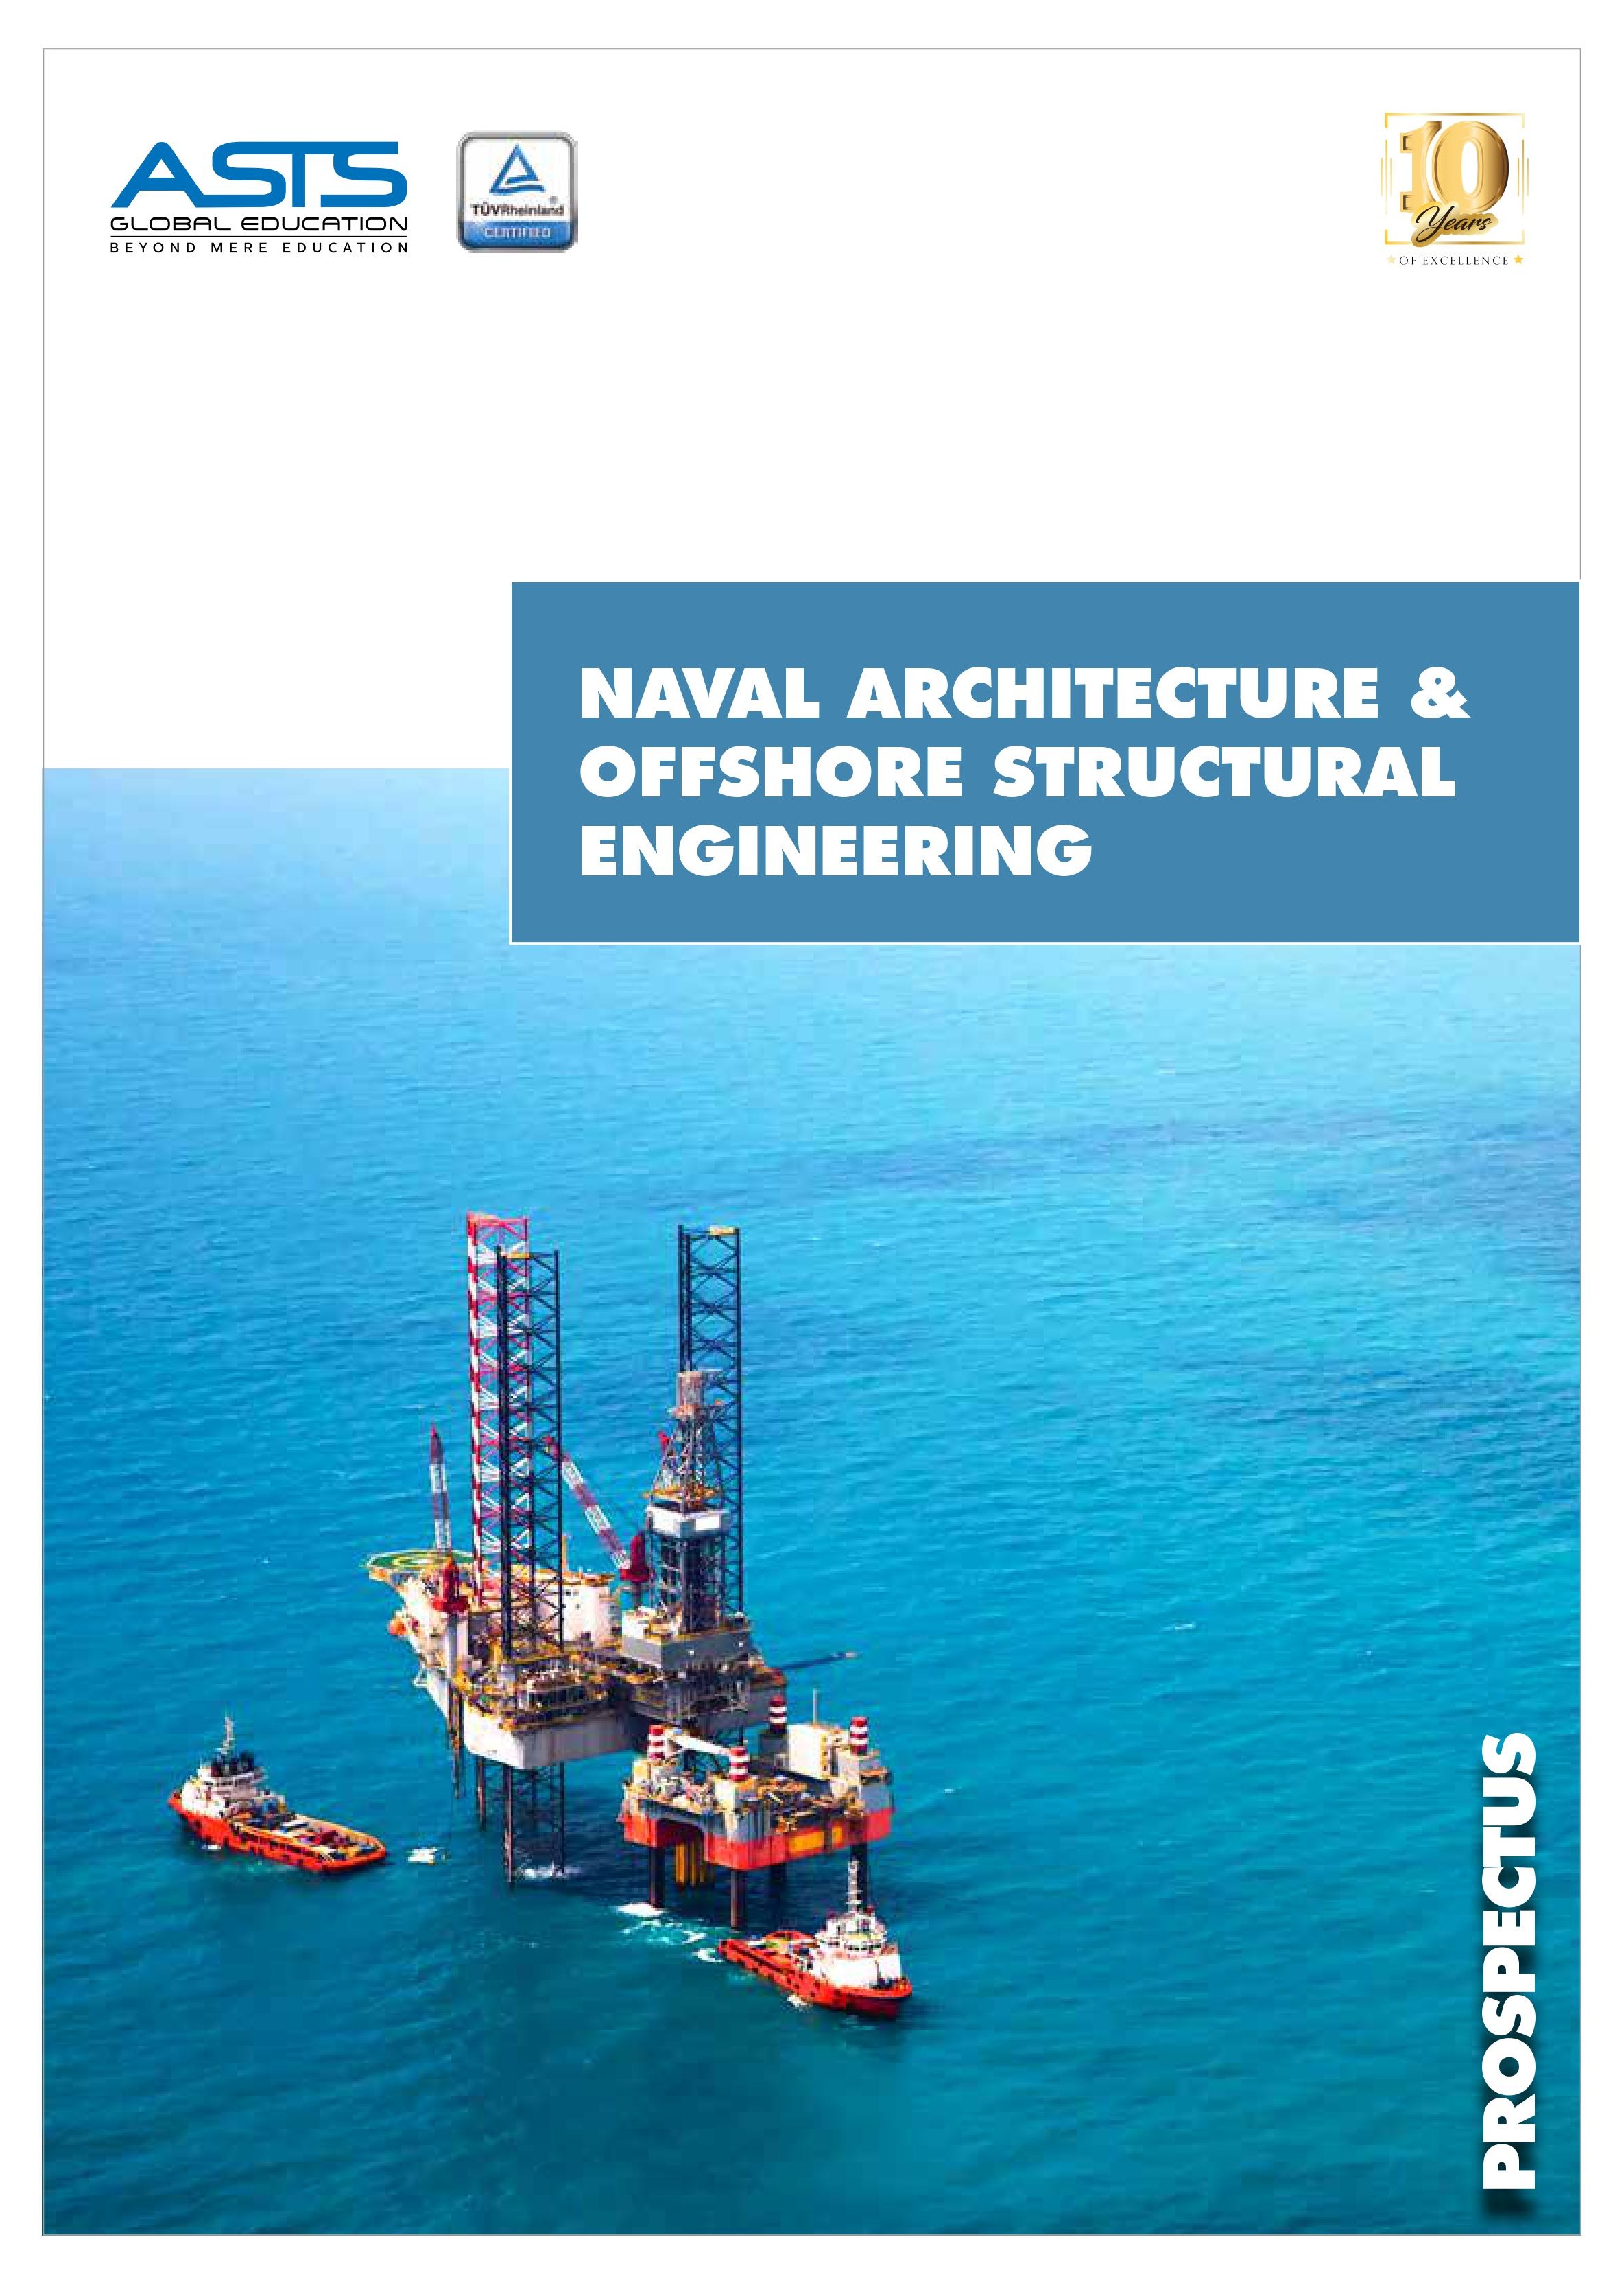 Naval Architecture and Offshore online course